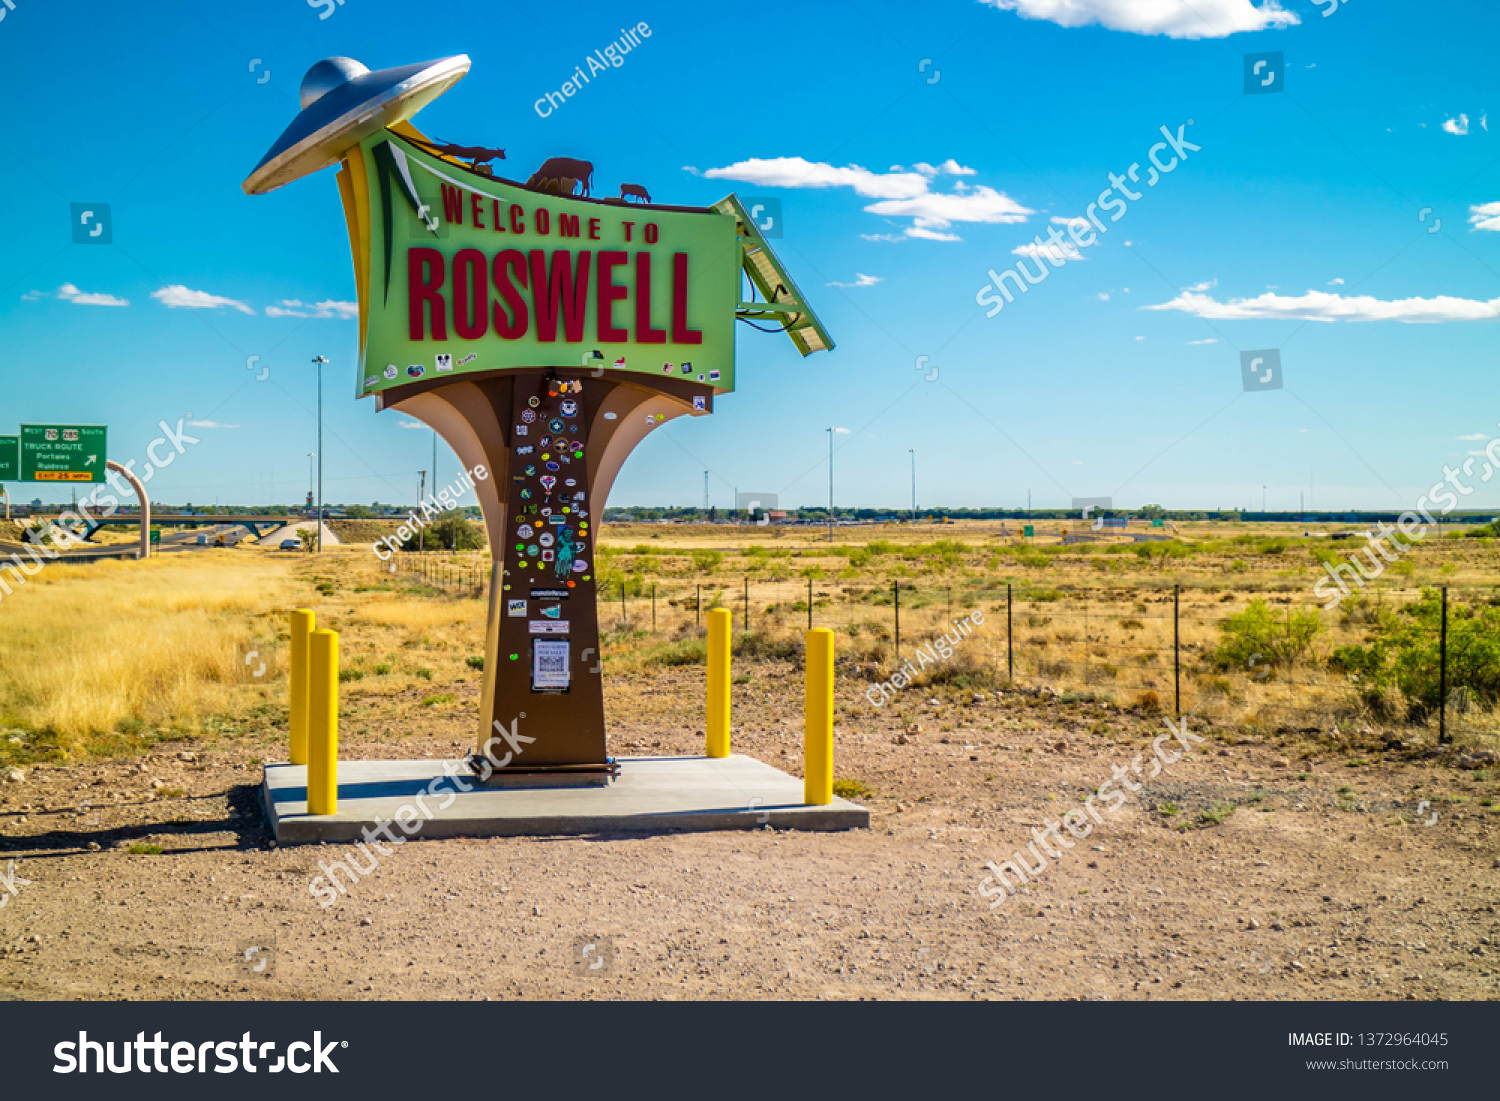 Roswell Stock Photos, Images & Photography Shutterstock